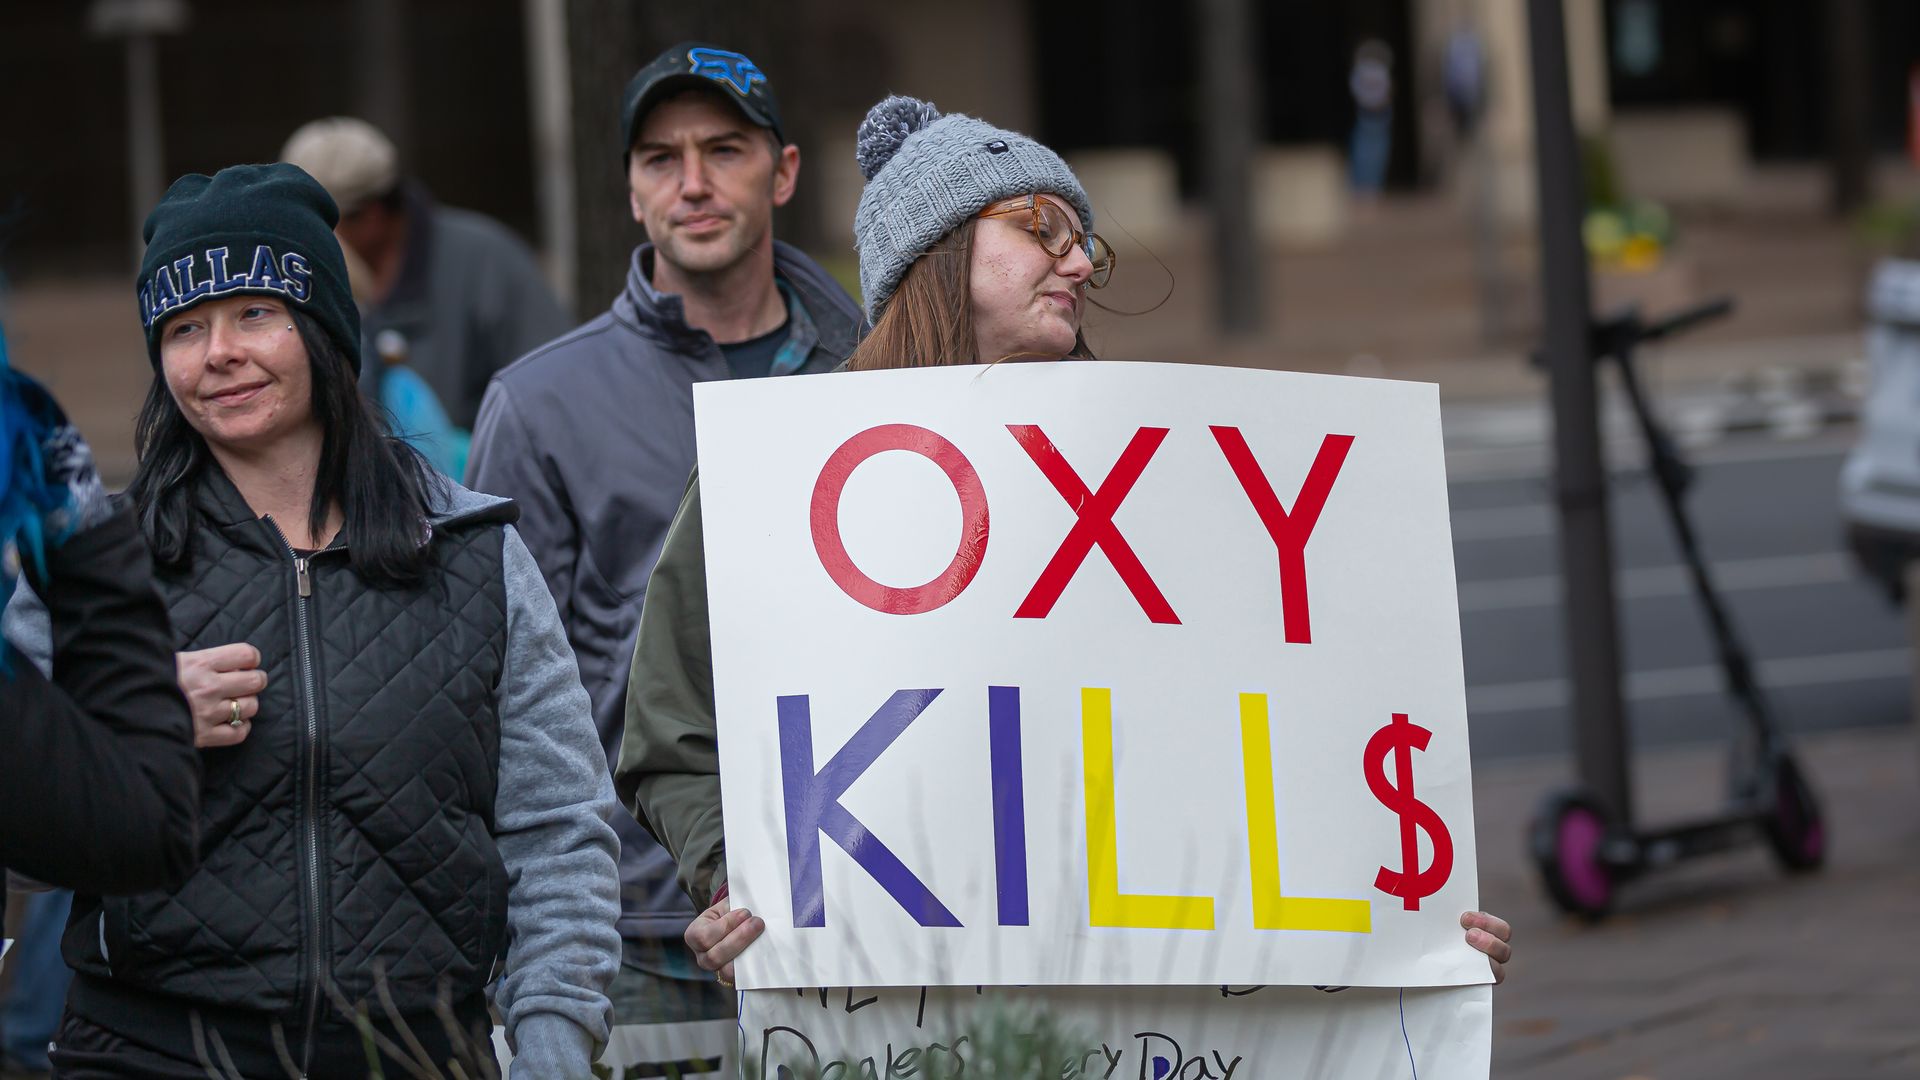 Picture of a person holding a sign that says "OXY KILLS" with a "$" instead of an "S" at the end